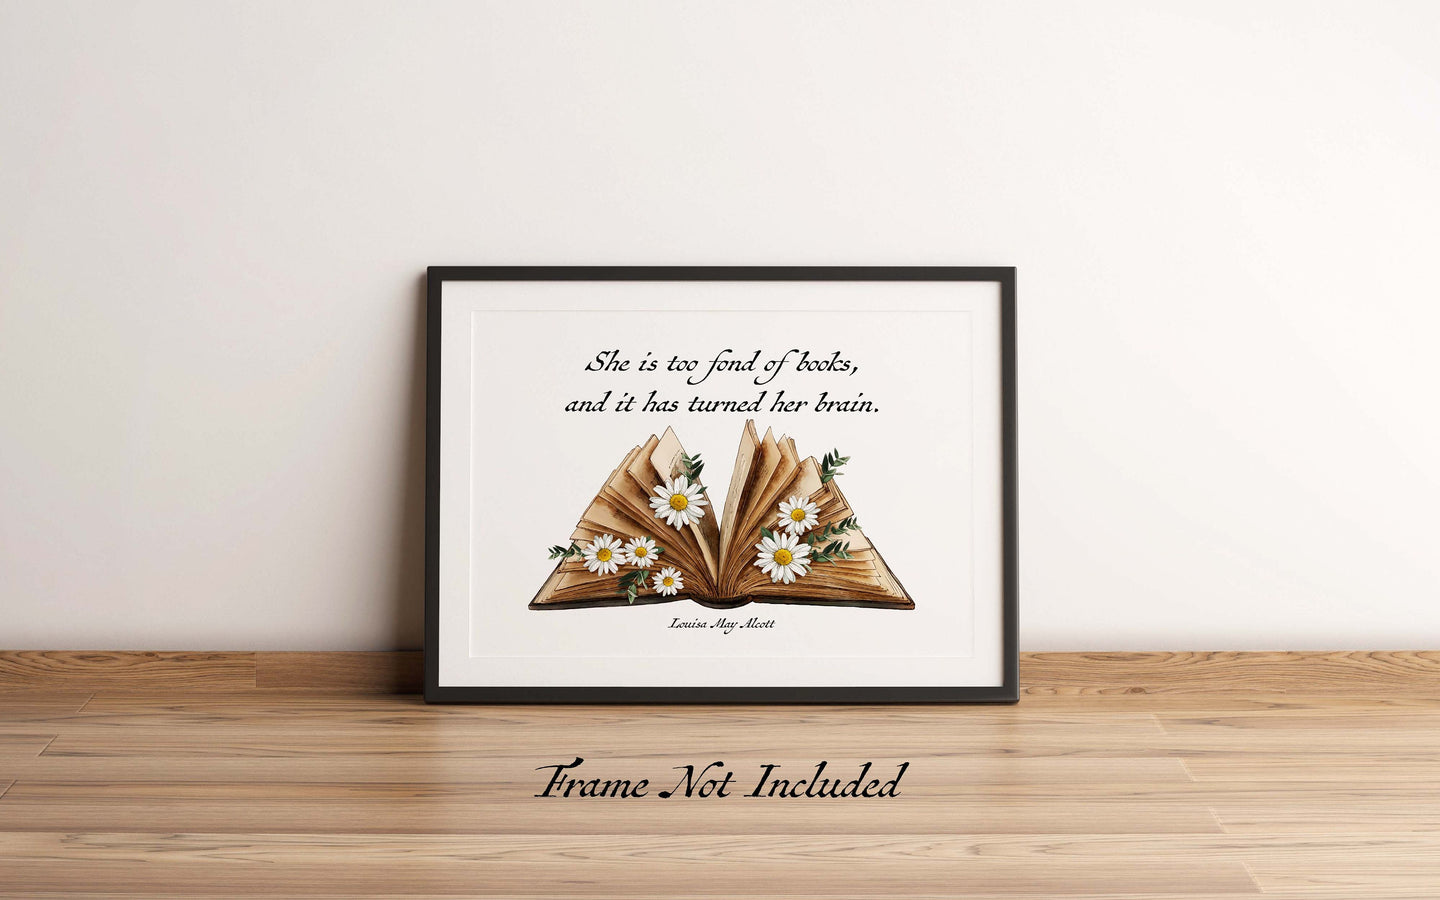 She is too fond of books, and it has turned her brain Louisa May Alcott Quote About Reading - Physical Art Print Without Frame